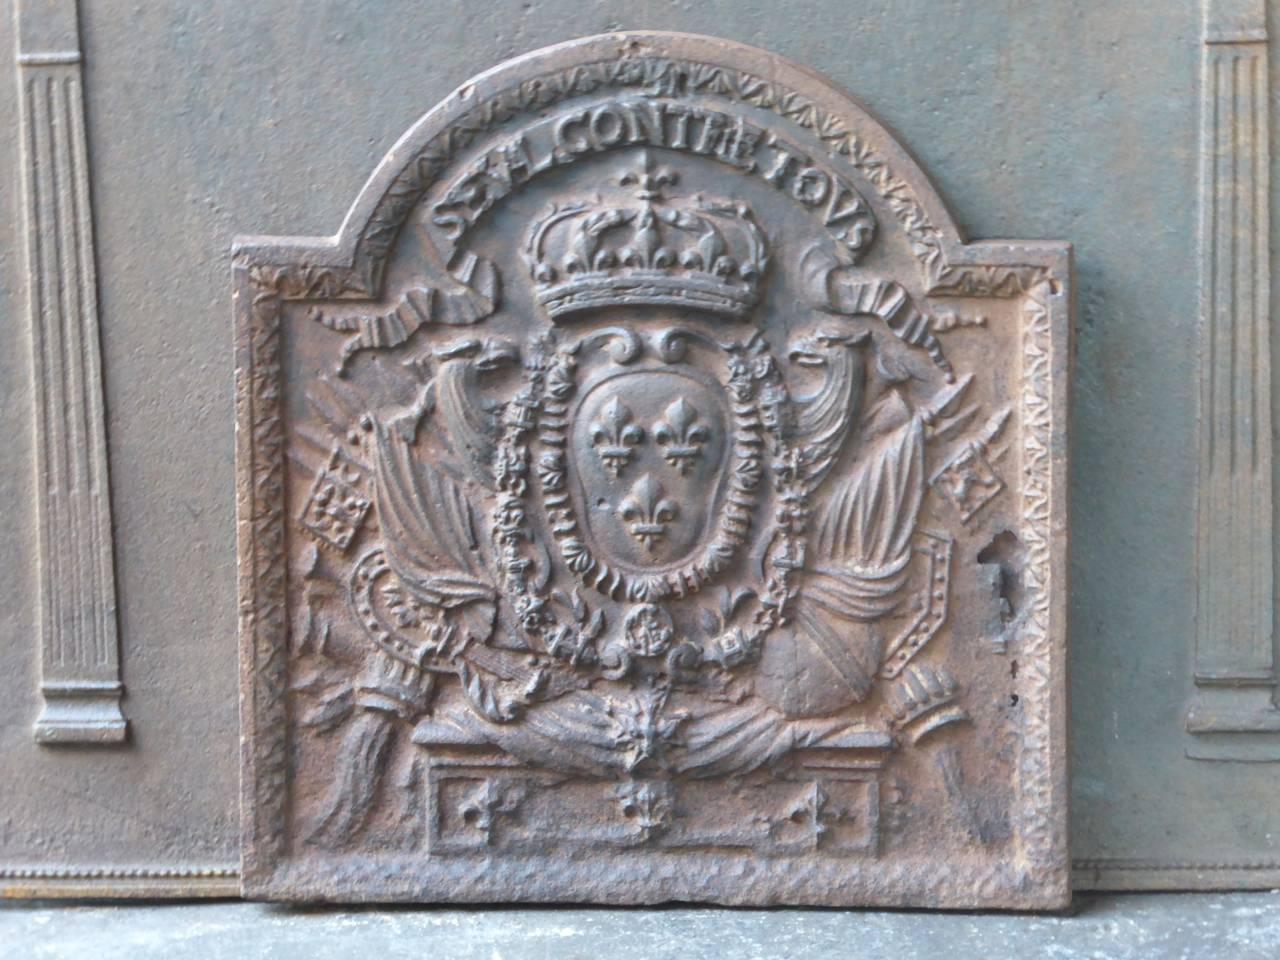 17th-18th century French fireback with the arms of France. Reminder plate that says Seul contre Tous, or 